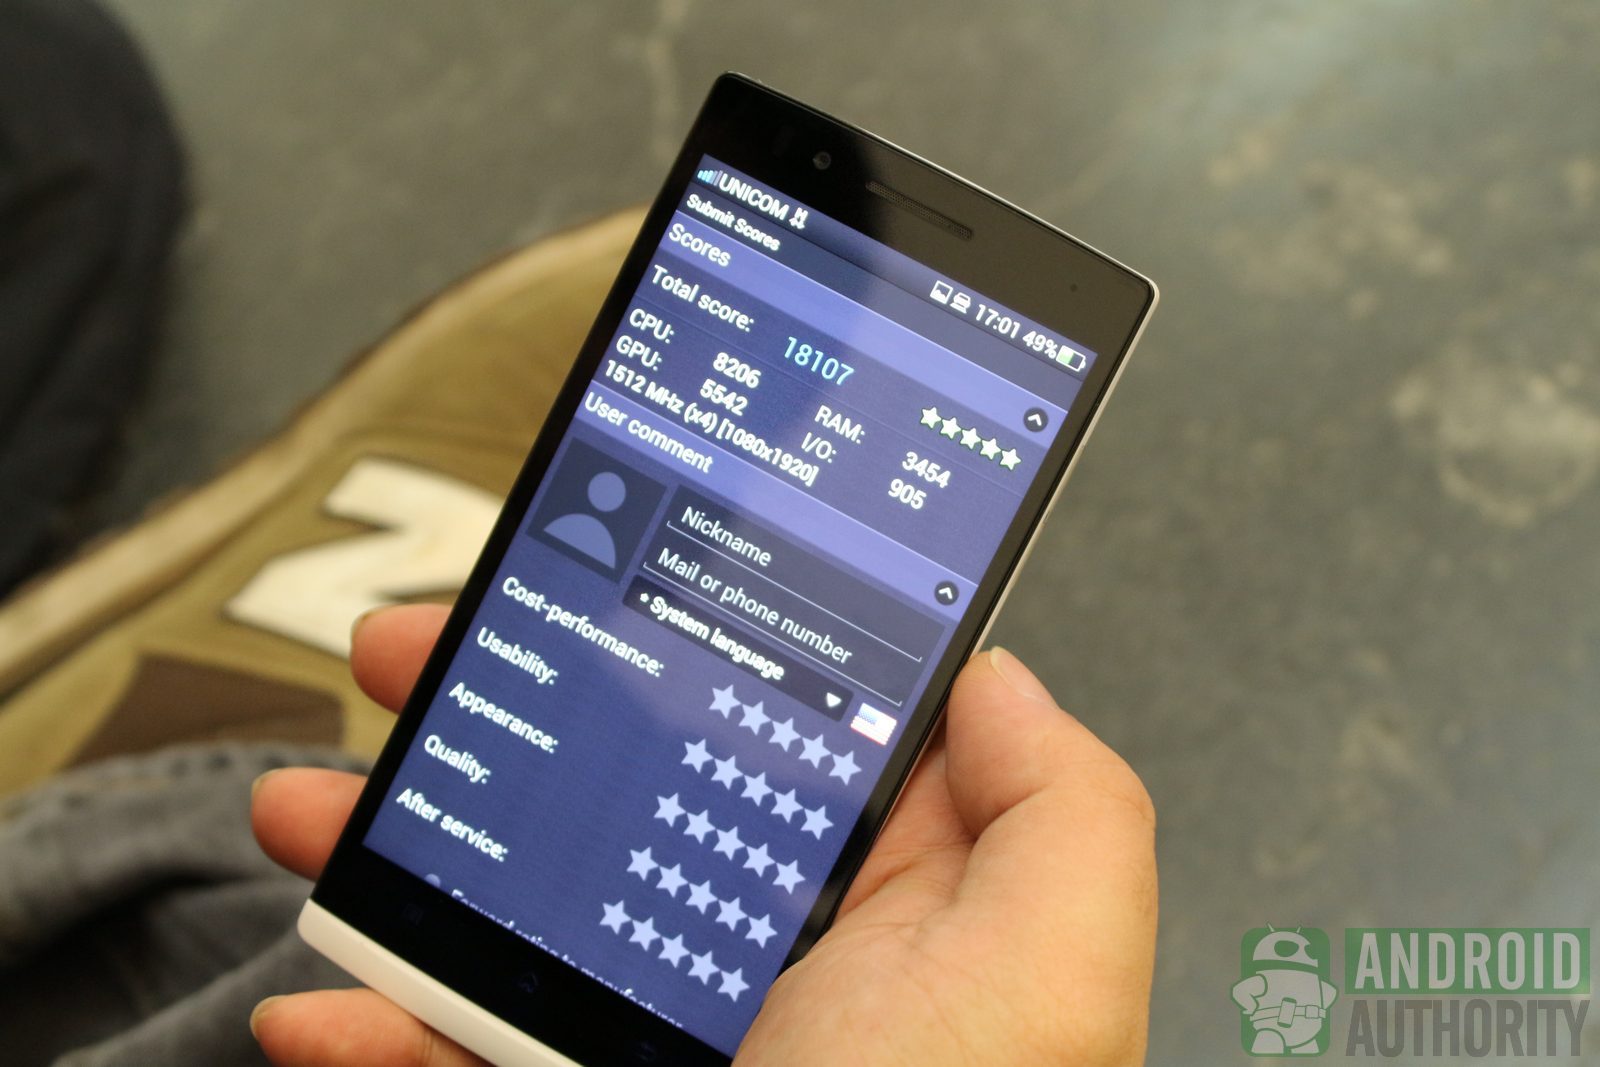 Oppo Find 5 benchmarks_1600px